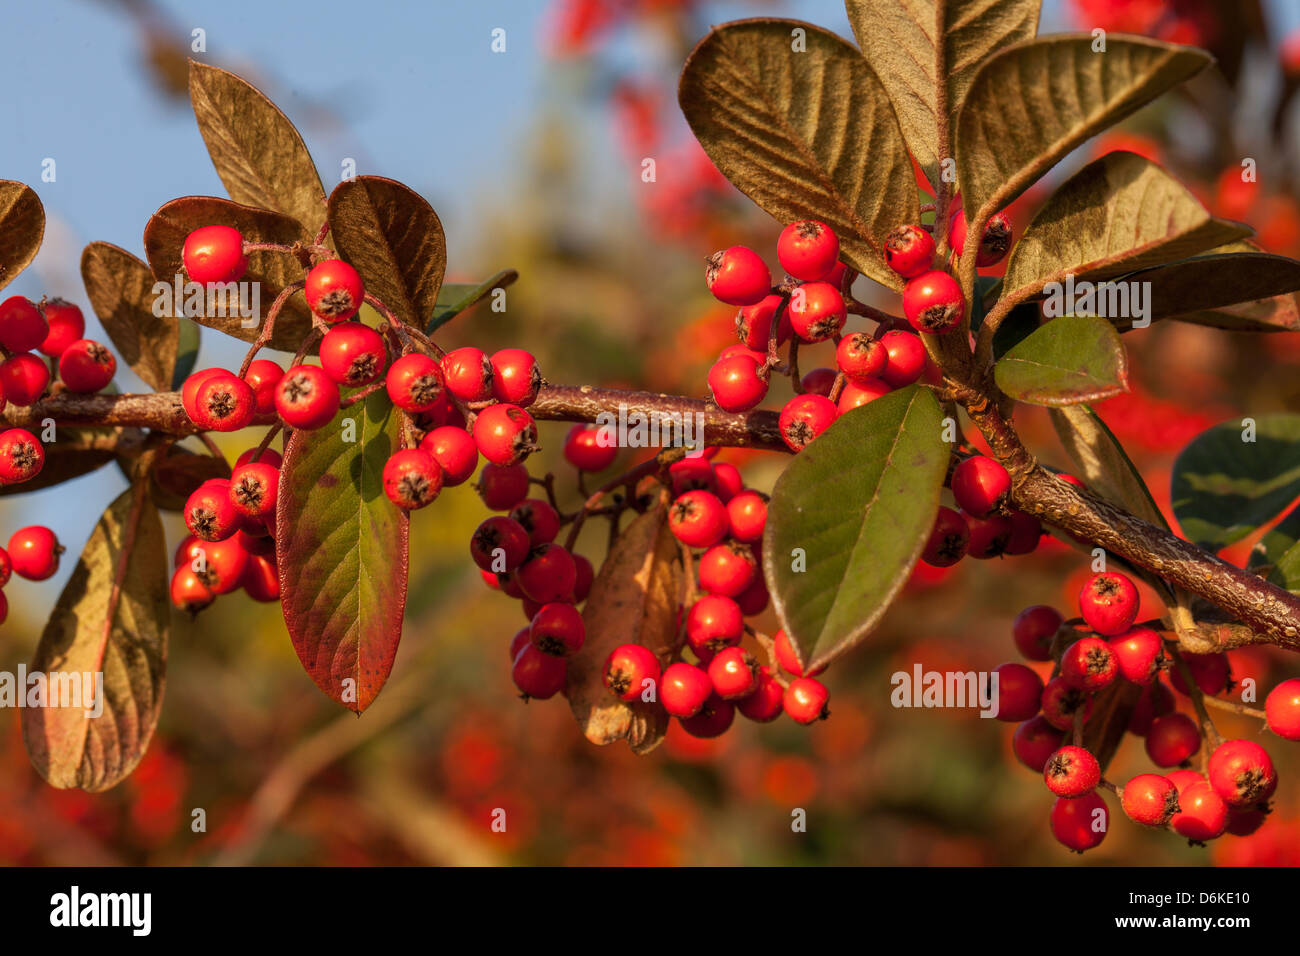 Red cotoneaster berries in a winter garden Stock Photo